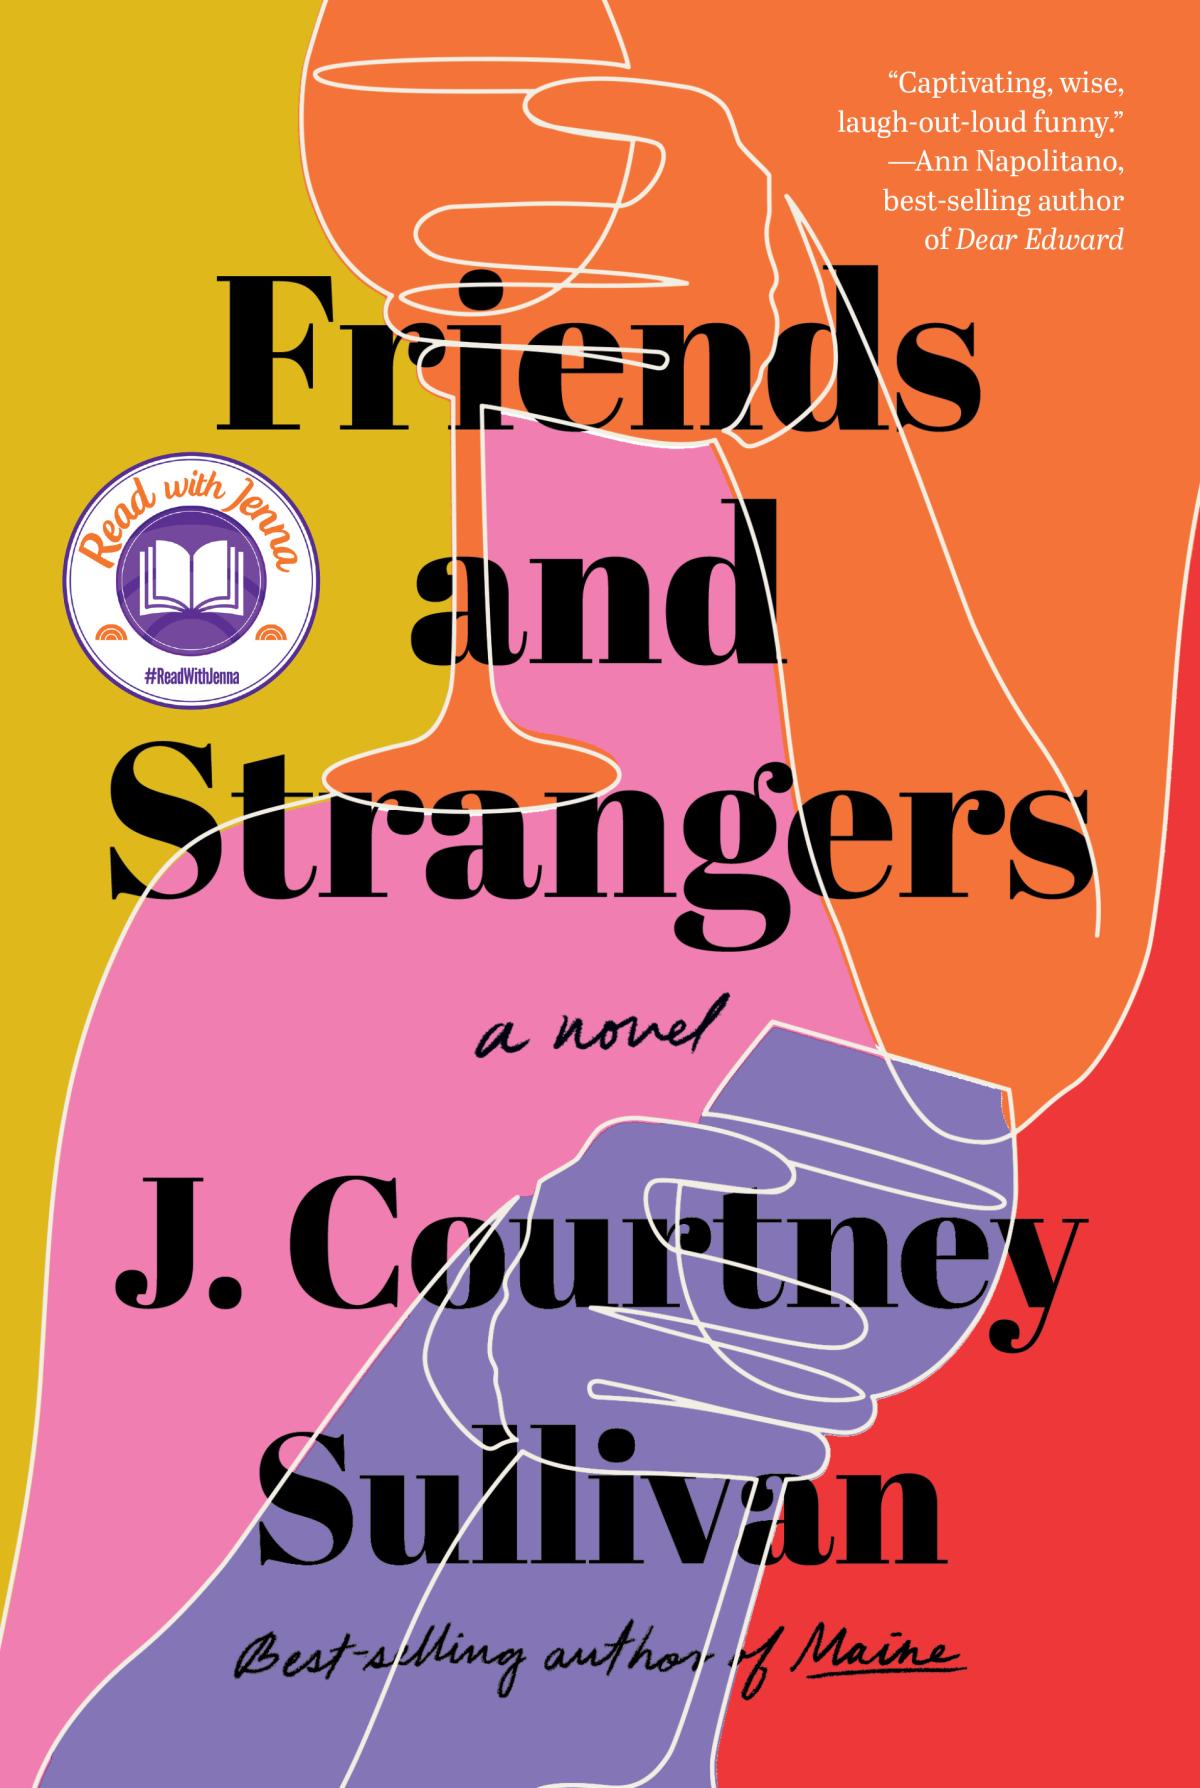 Friends and Strangers by J. Courtney Sullivan book cover